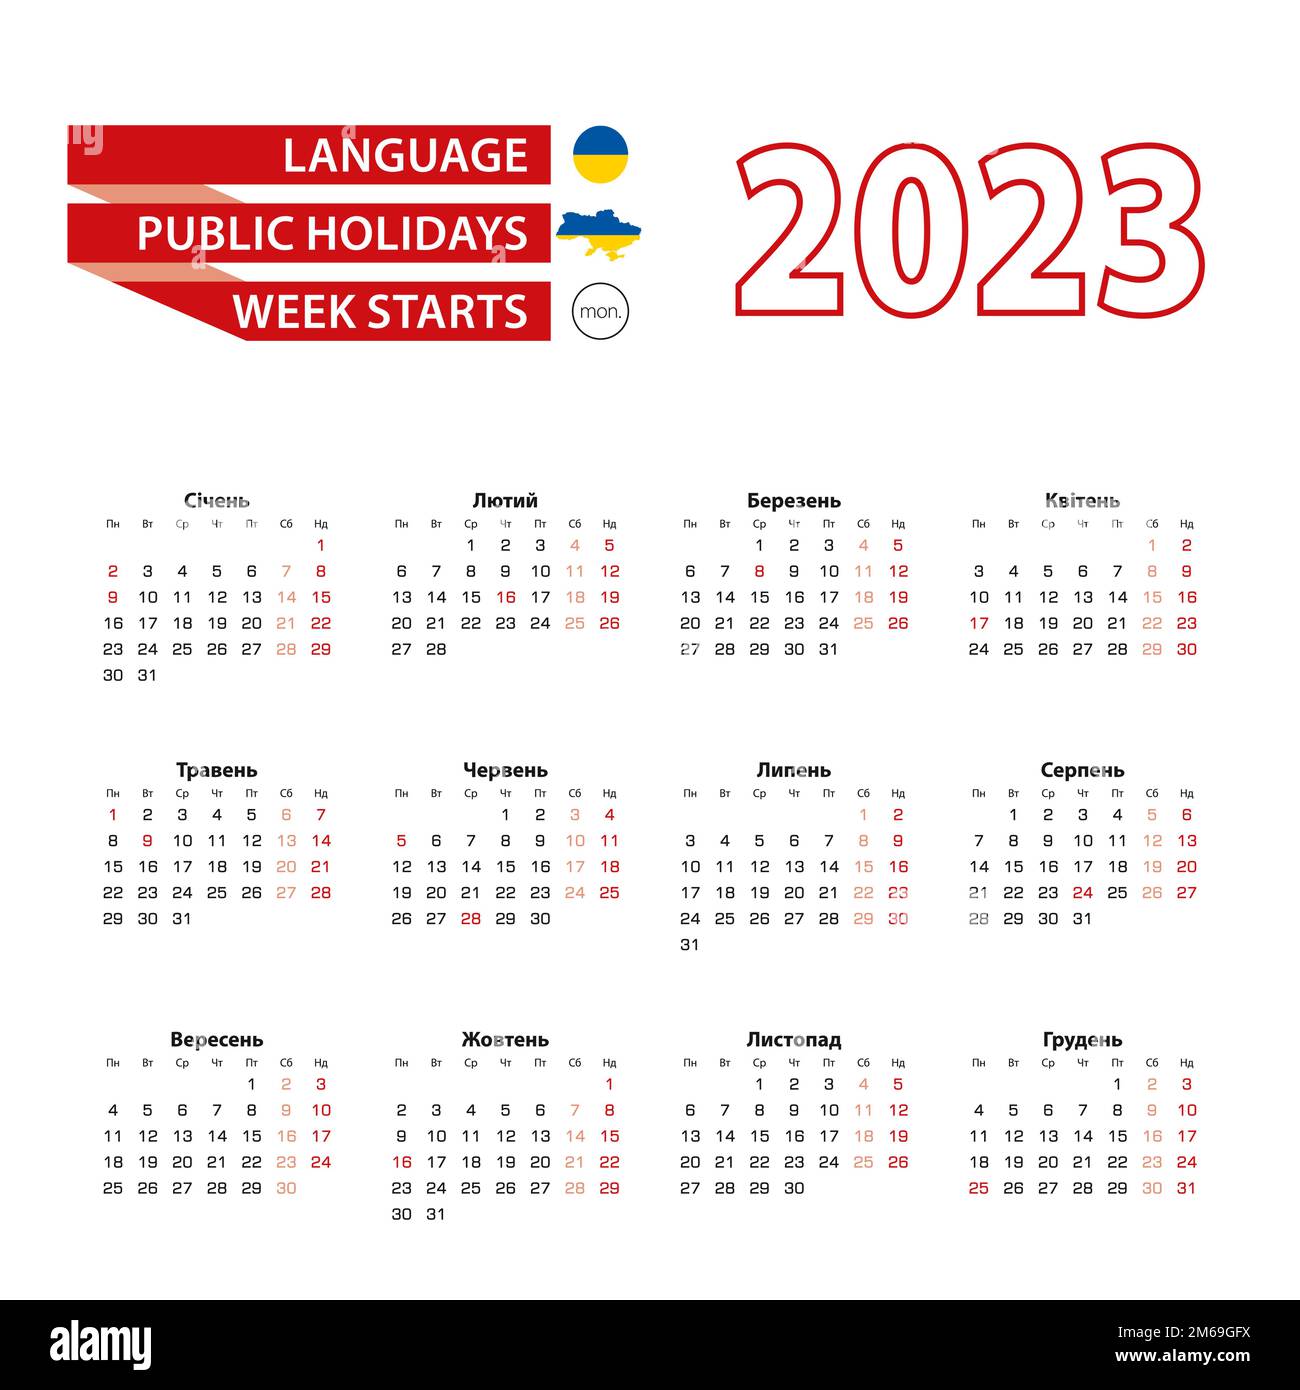 Calendar 2023 in Ukrainian language with public holidays the country of